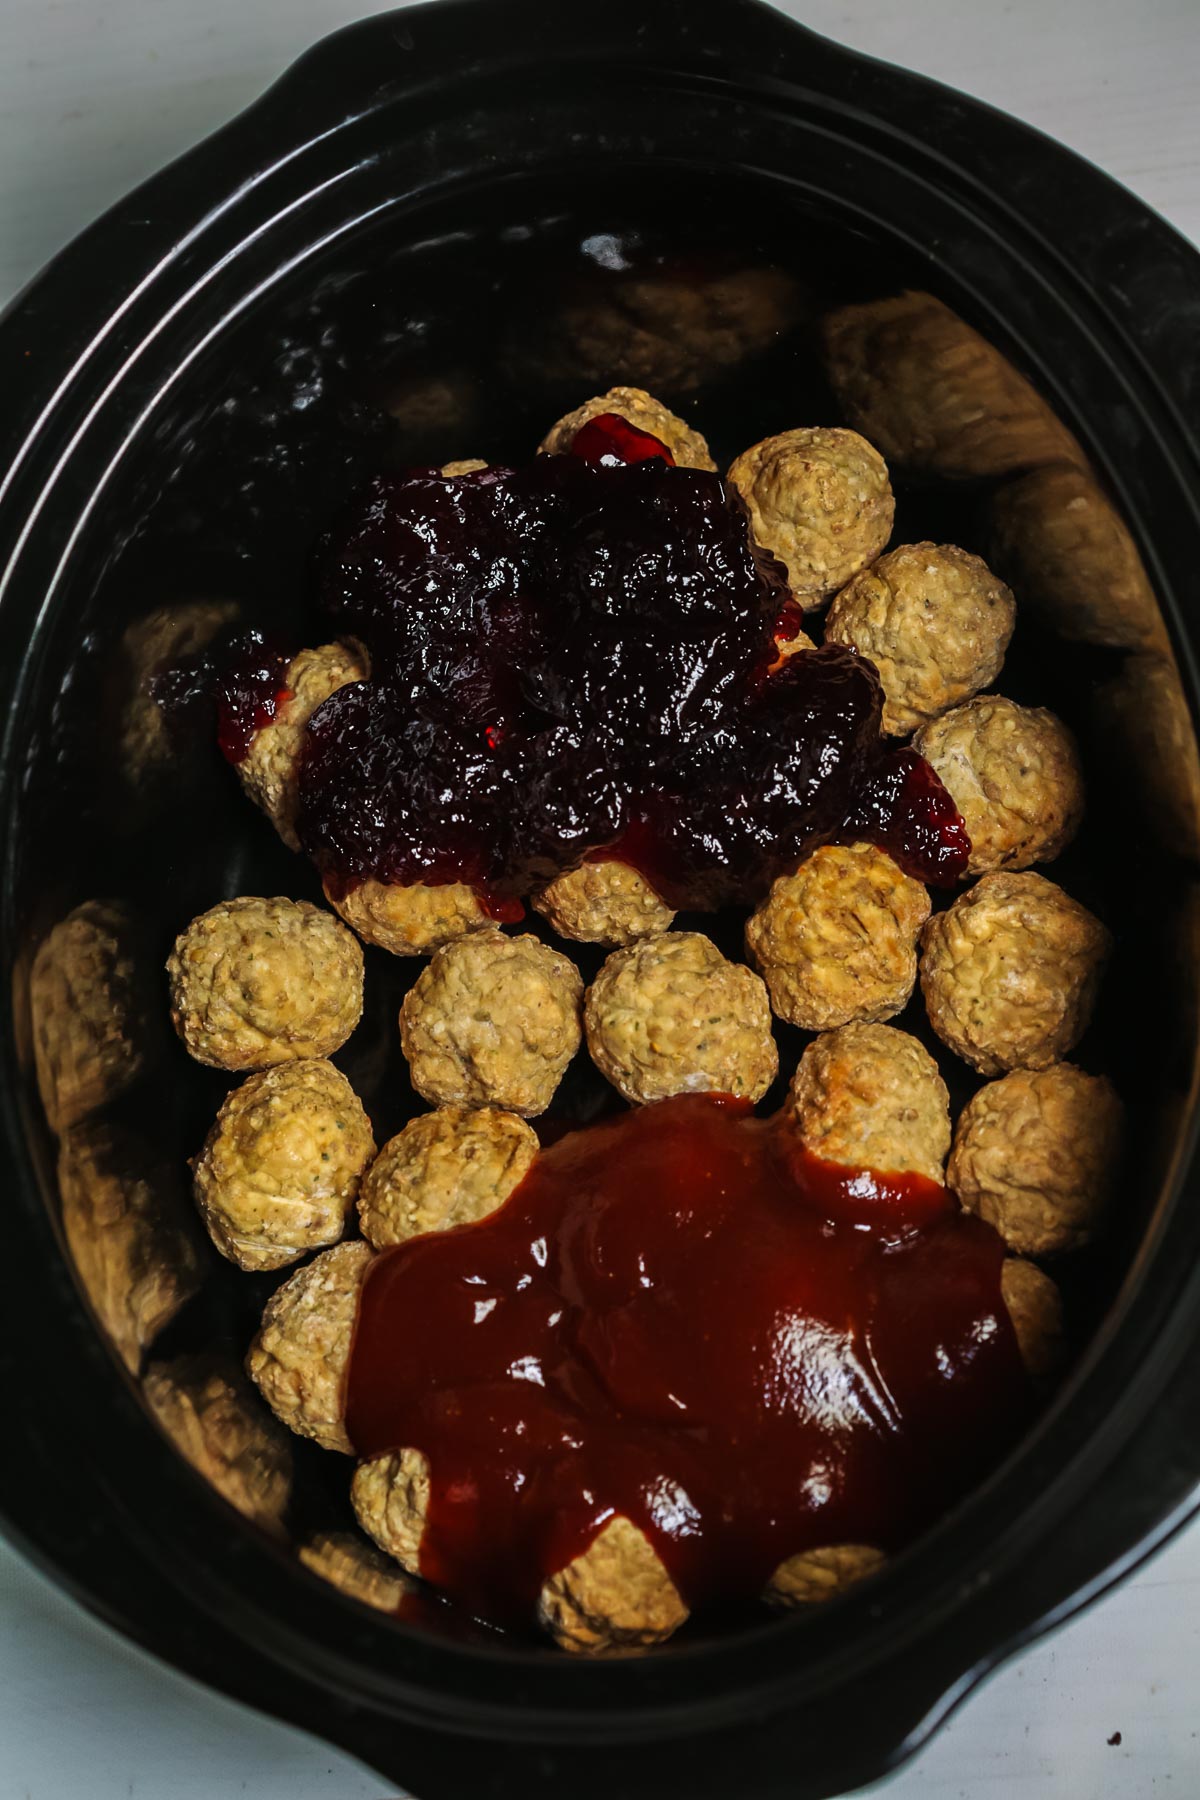 Barbecue meatballs cooked in a crock pot with sauce.